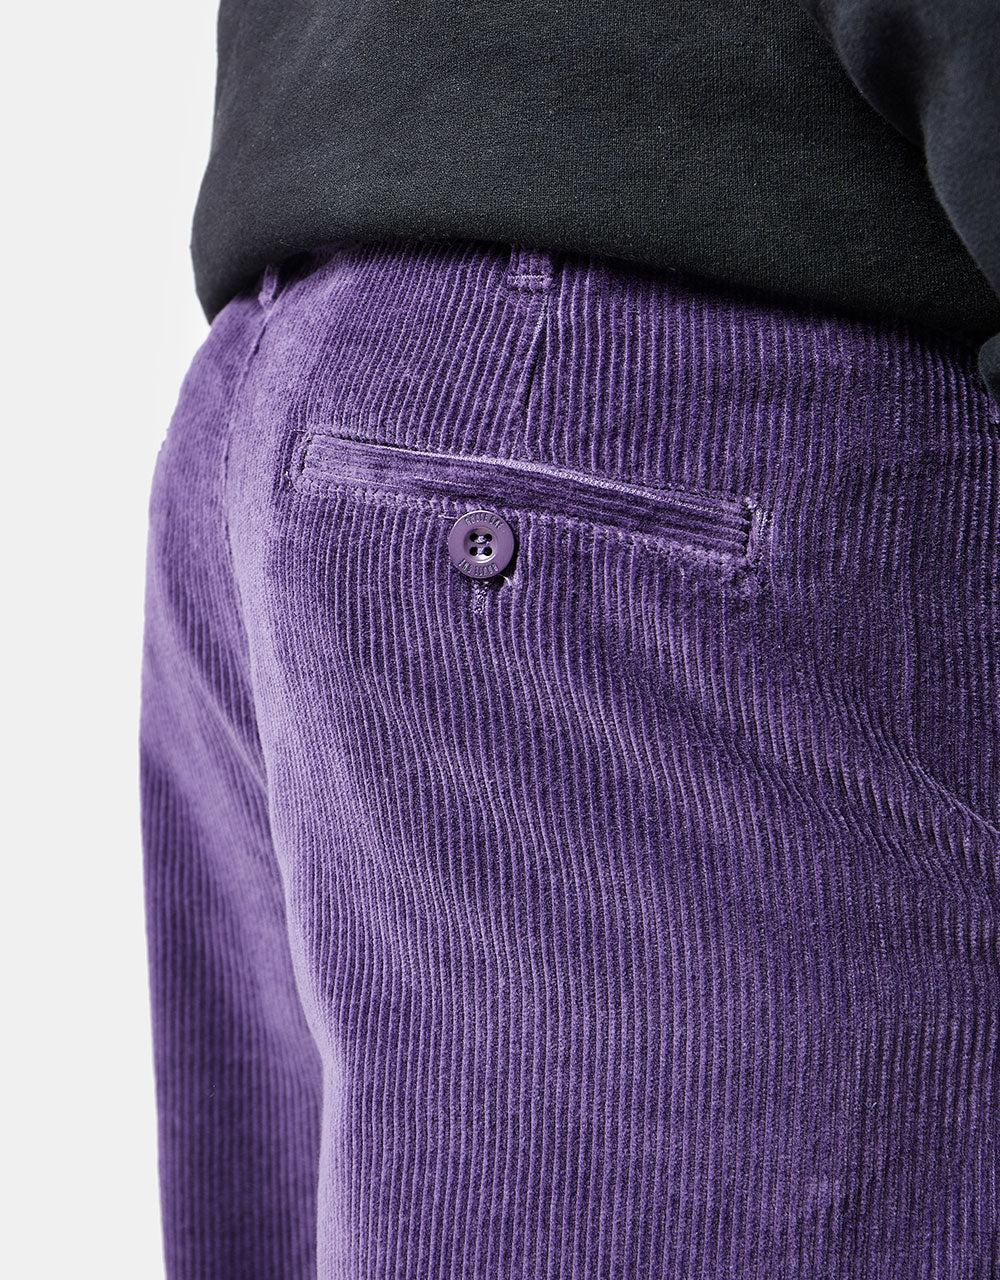 Route One Relaxed Fit Big Wale Cords - Moderate Purple